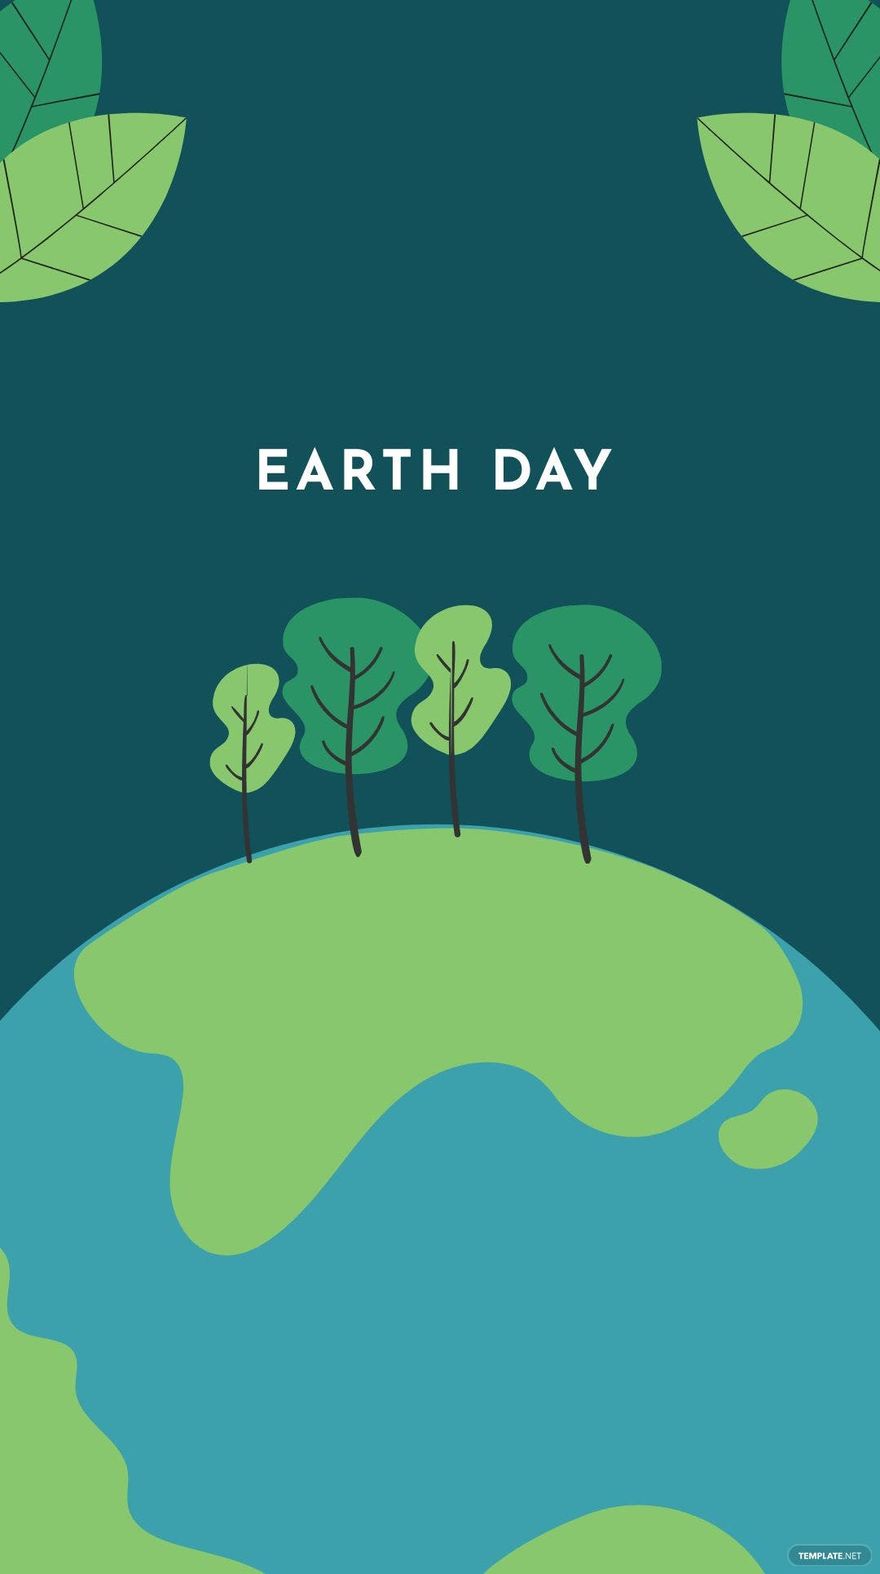 Free Earth Day iPhone Background in PDF, Illustrator, PSD, EPS, SVG, JPG, PNG